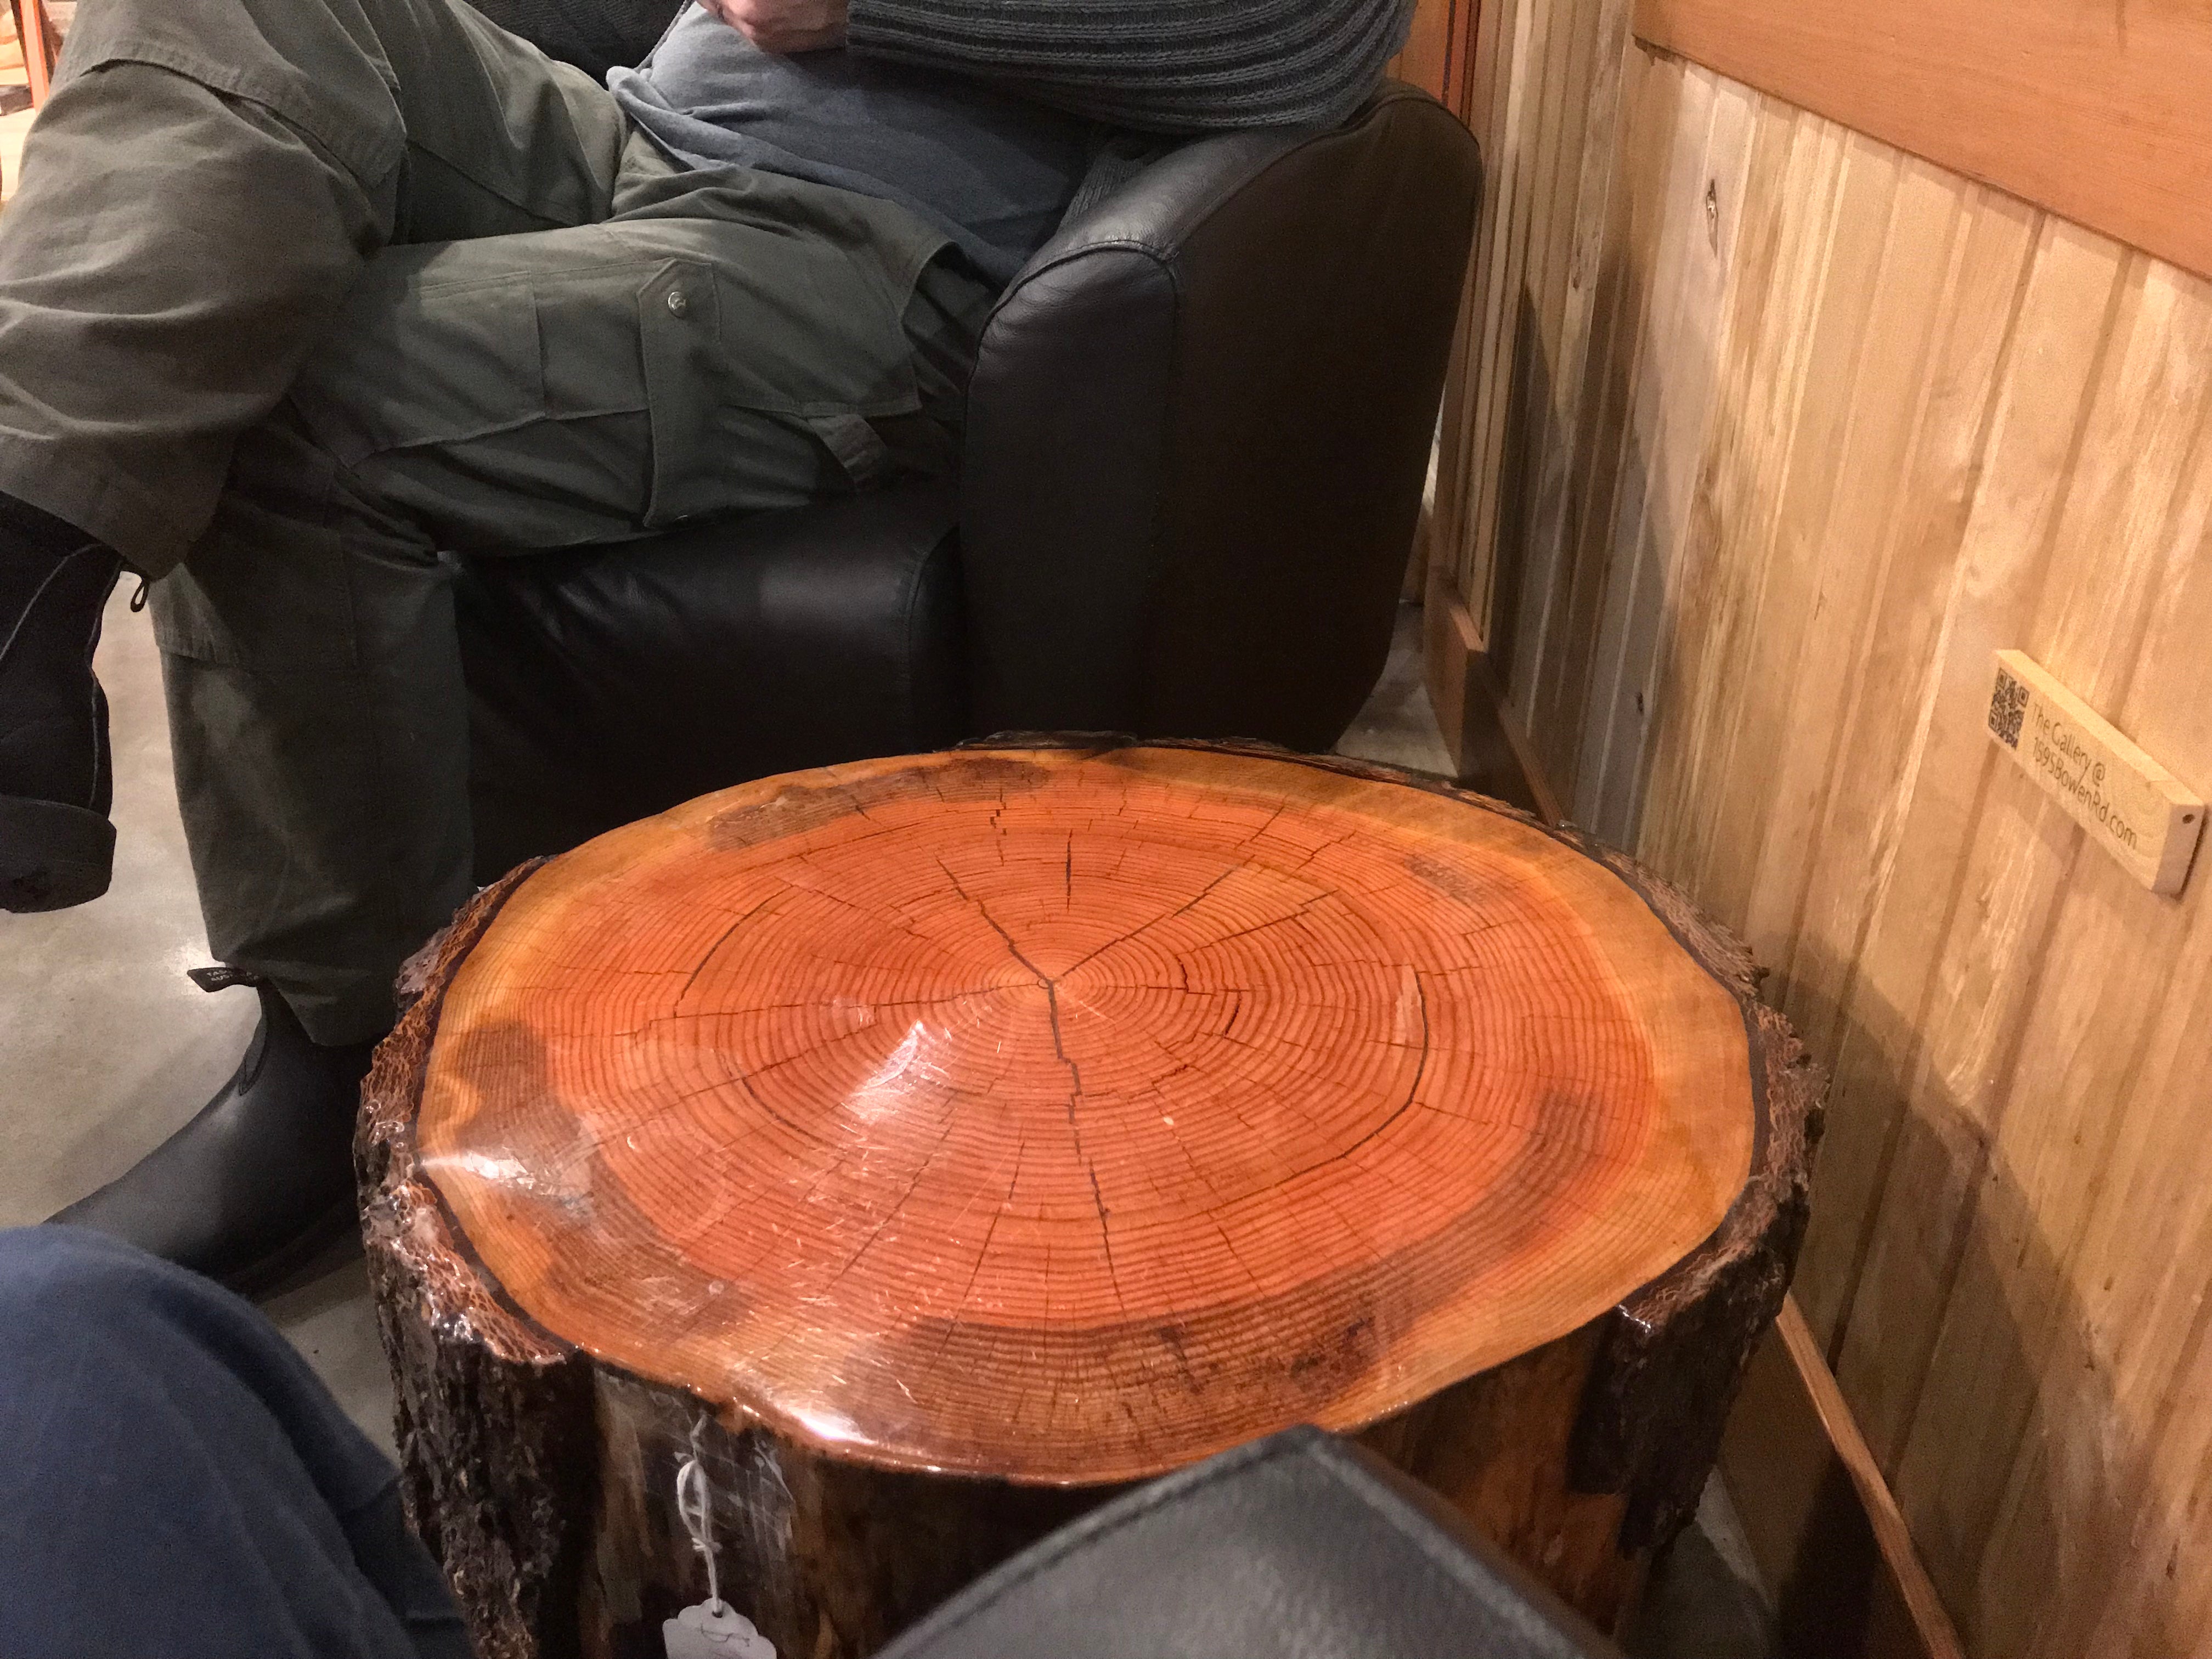 The campfire coffee table